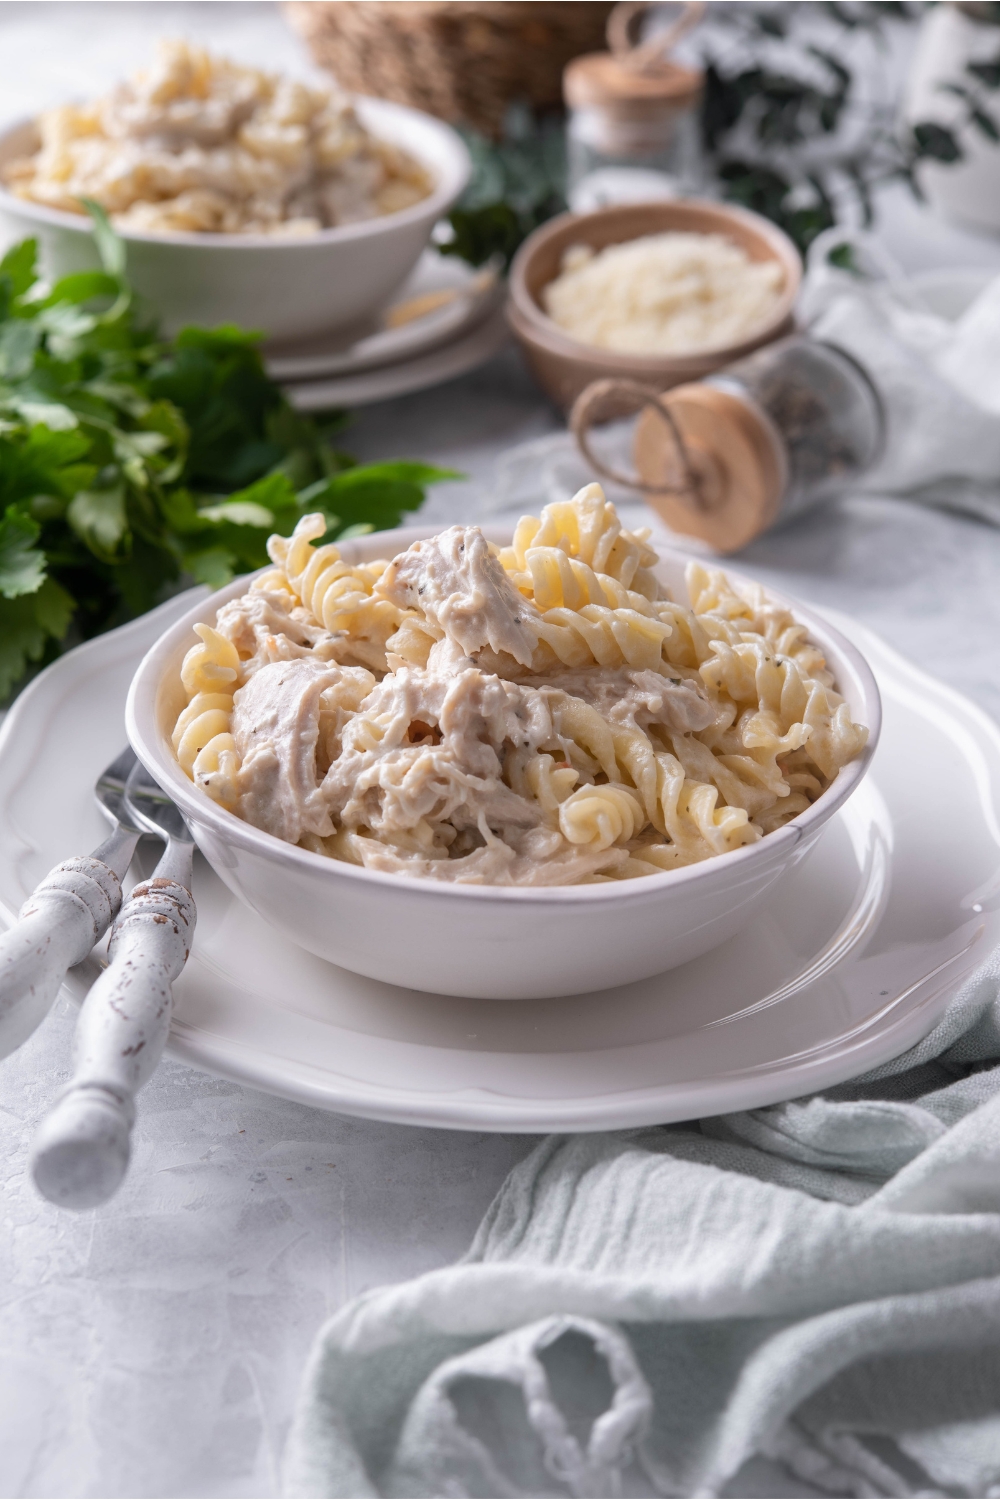 A bowl of pasta and chicken in a cream sauce atop a white plate with two forks next to the bowl of chicken and pasta.